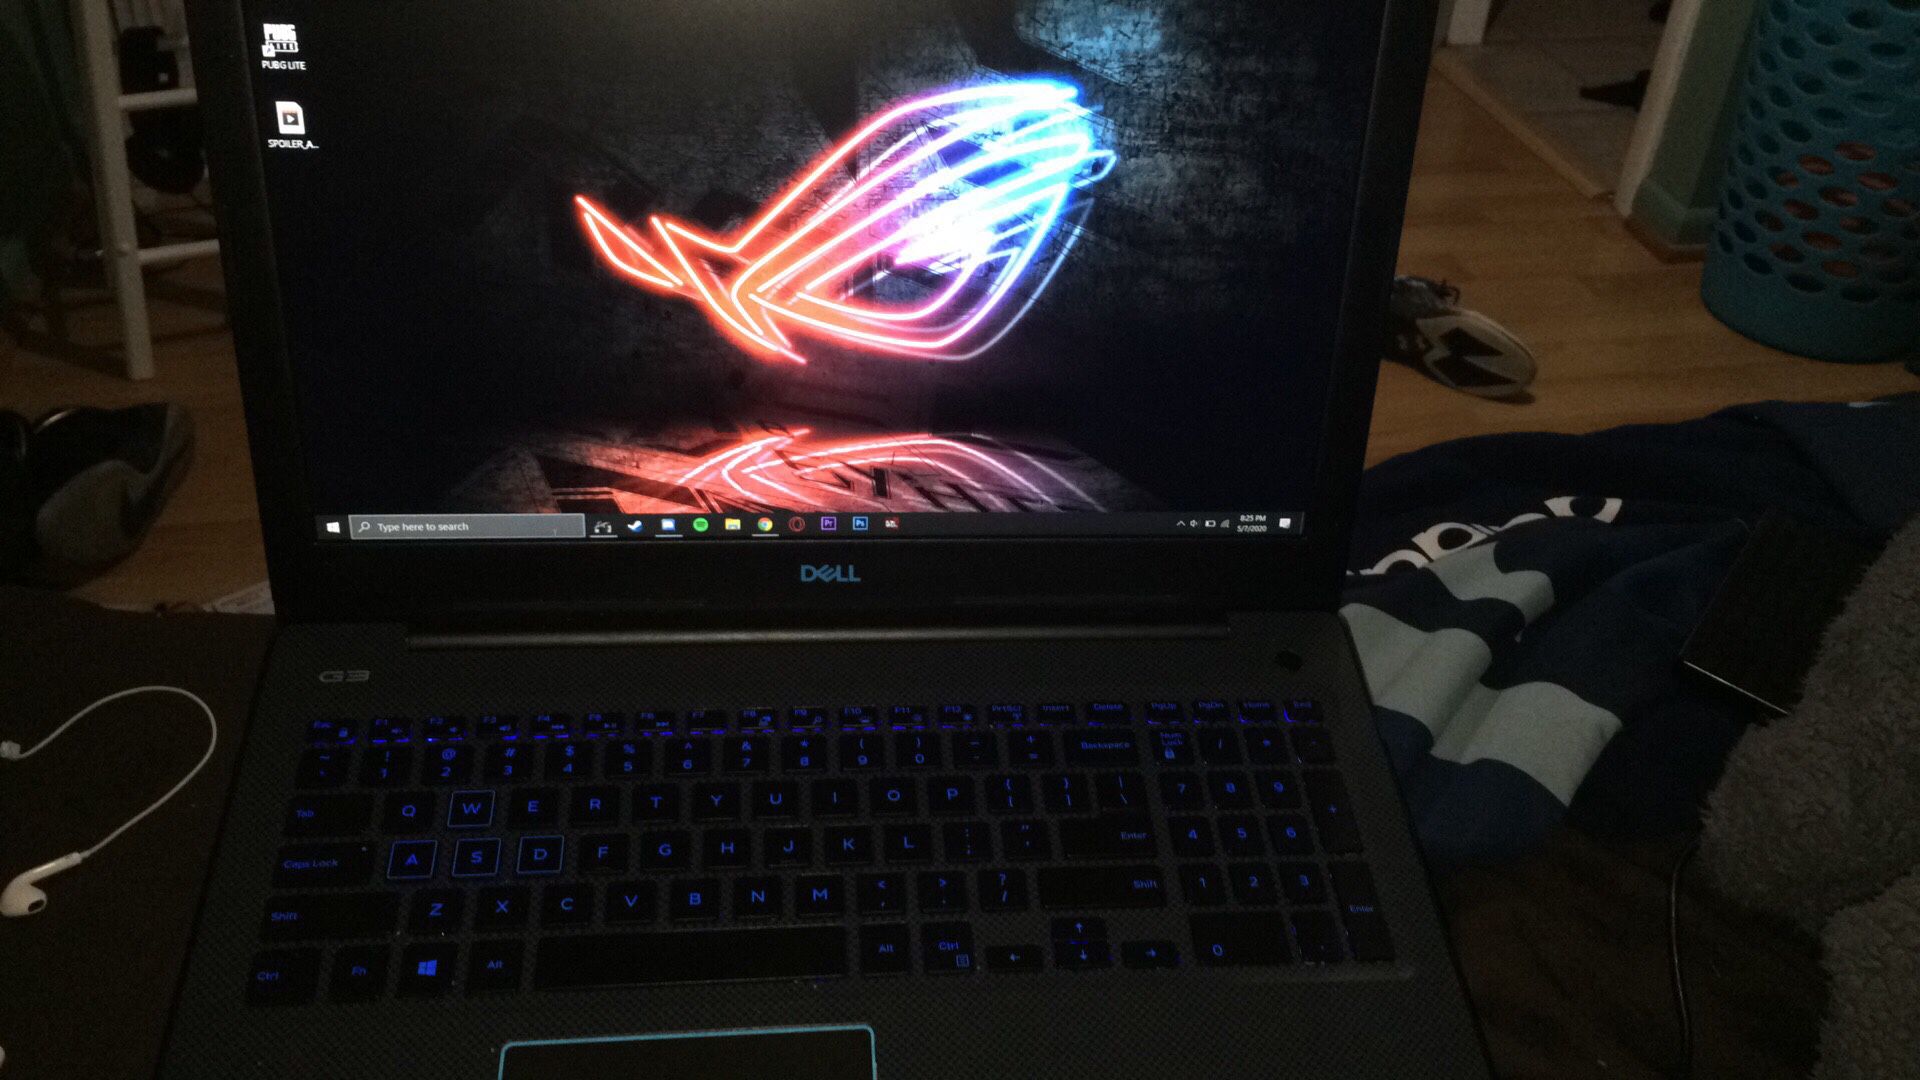 Dell G3 15.6” Gaming Laptop